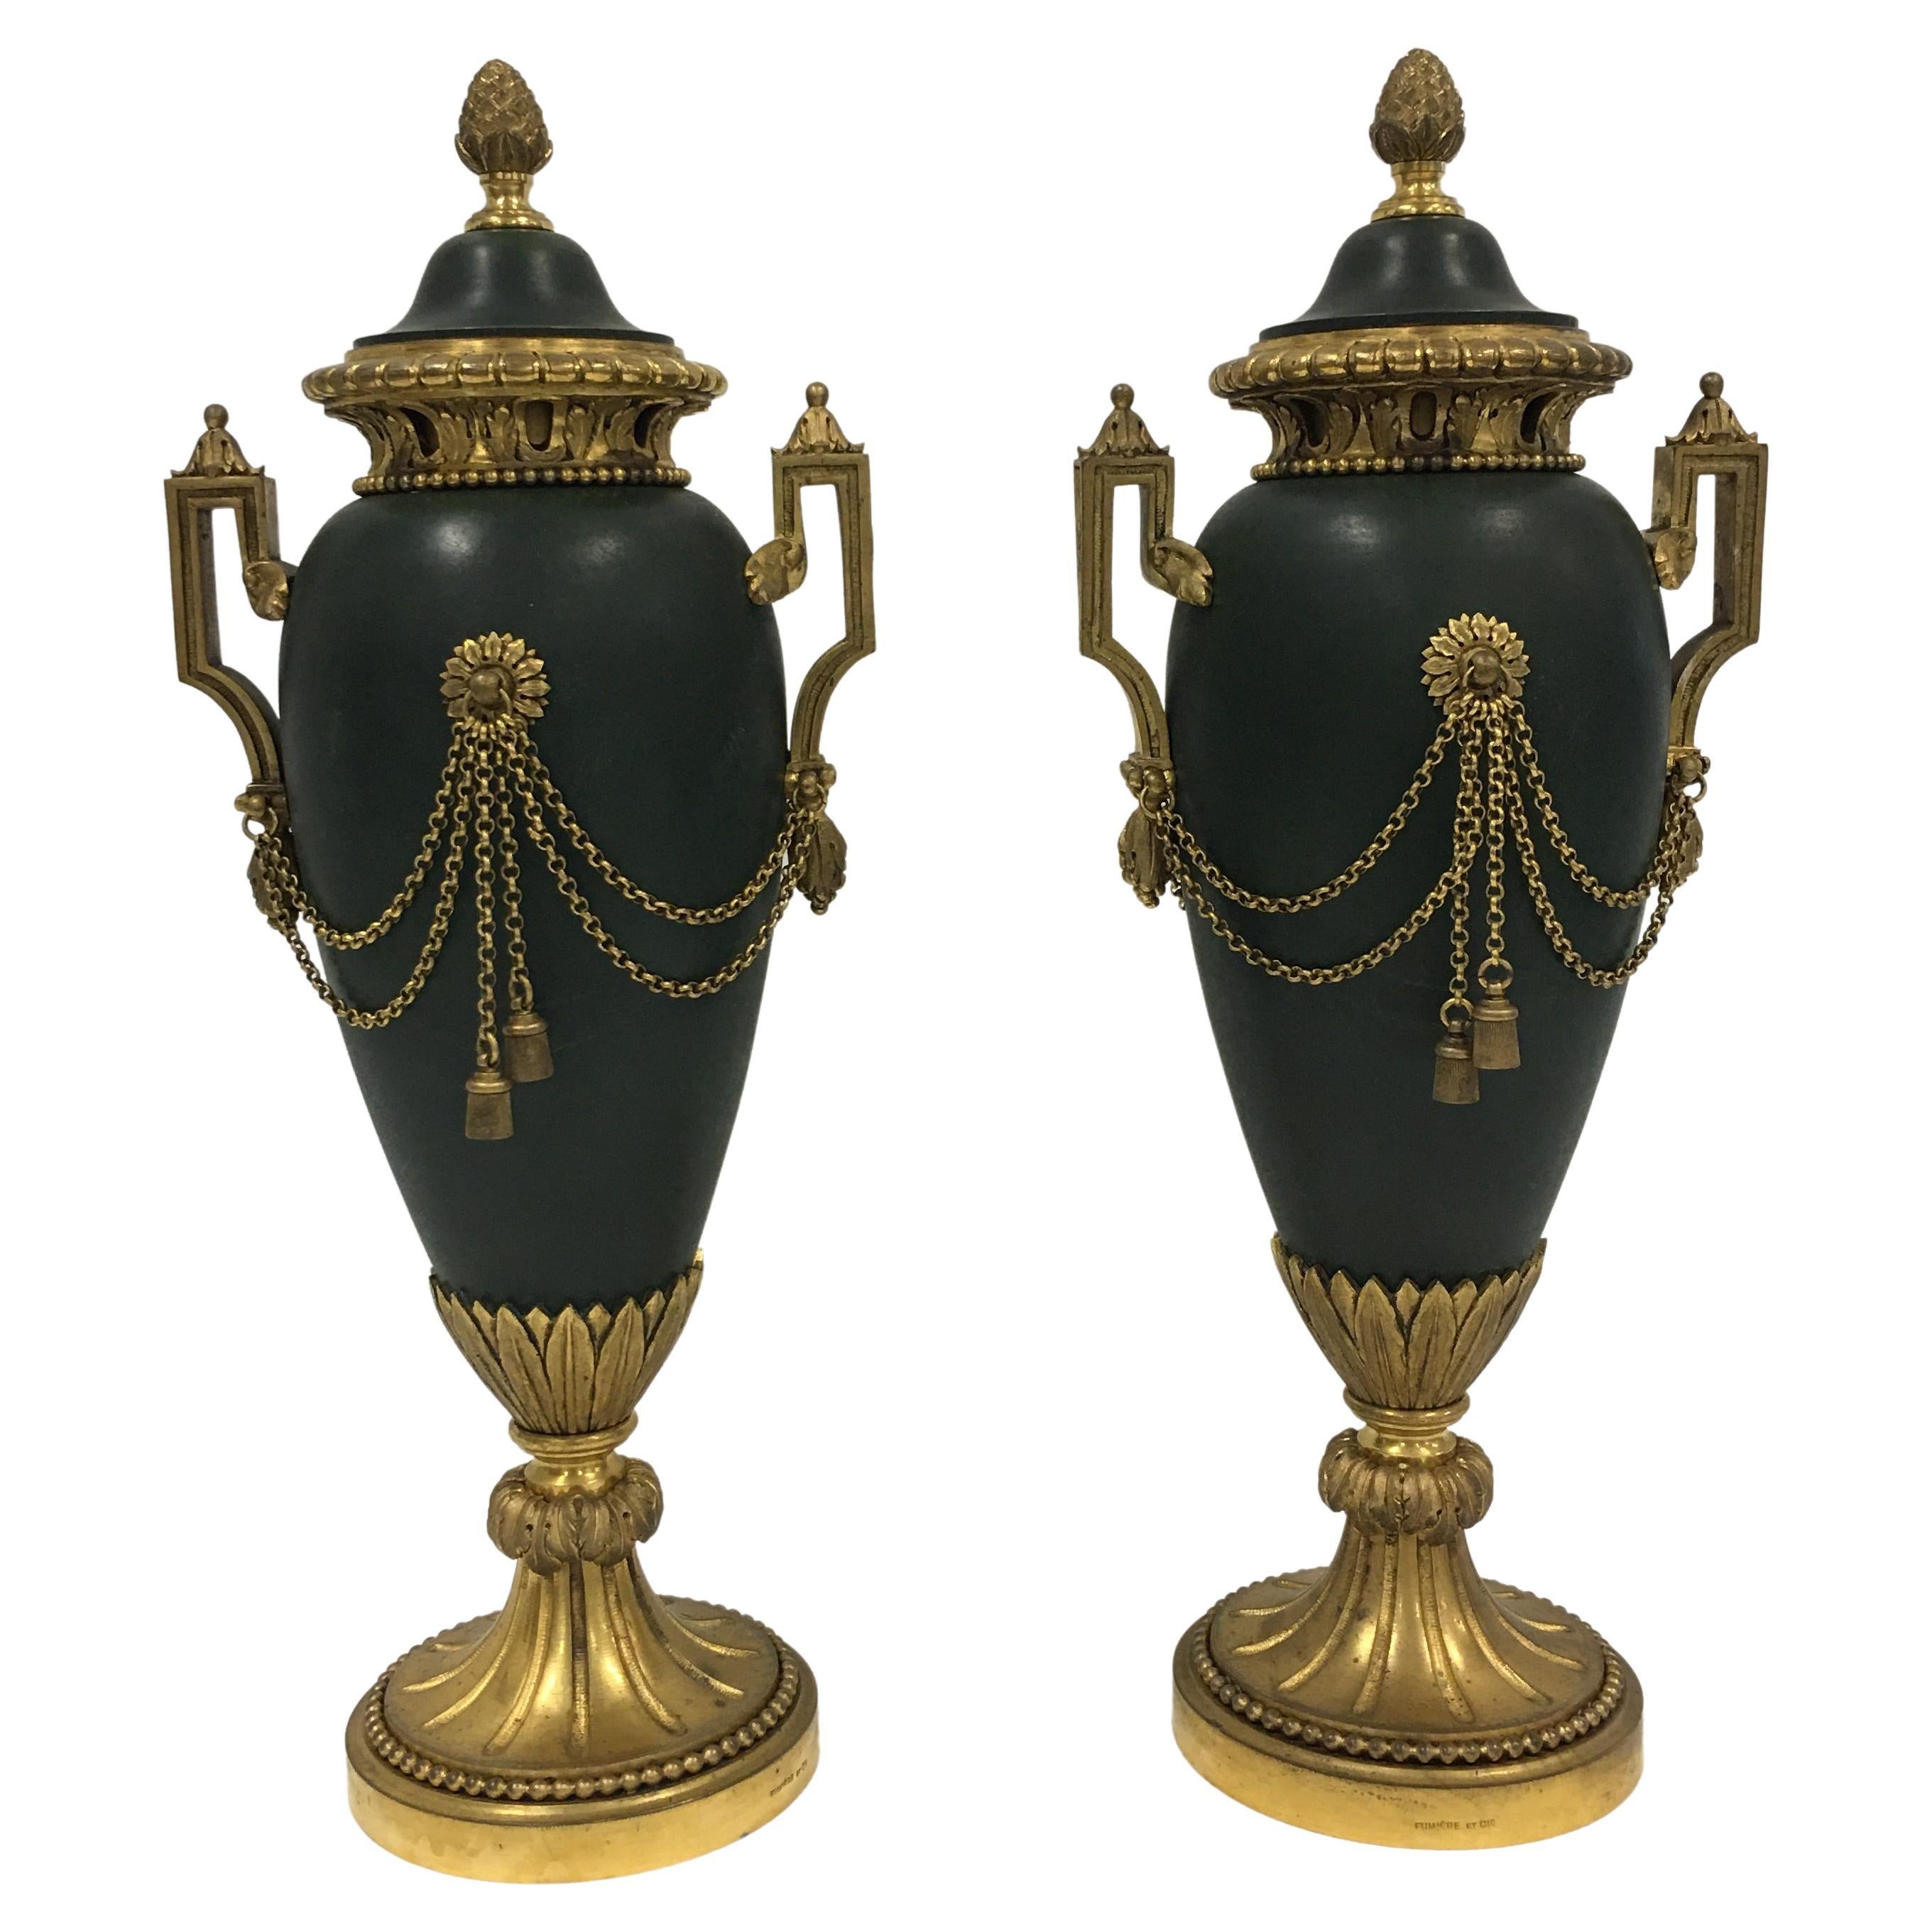 A pair of French Empire period painted bronze and ormolu casolettes